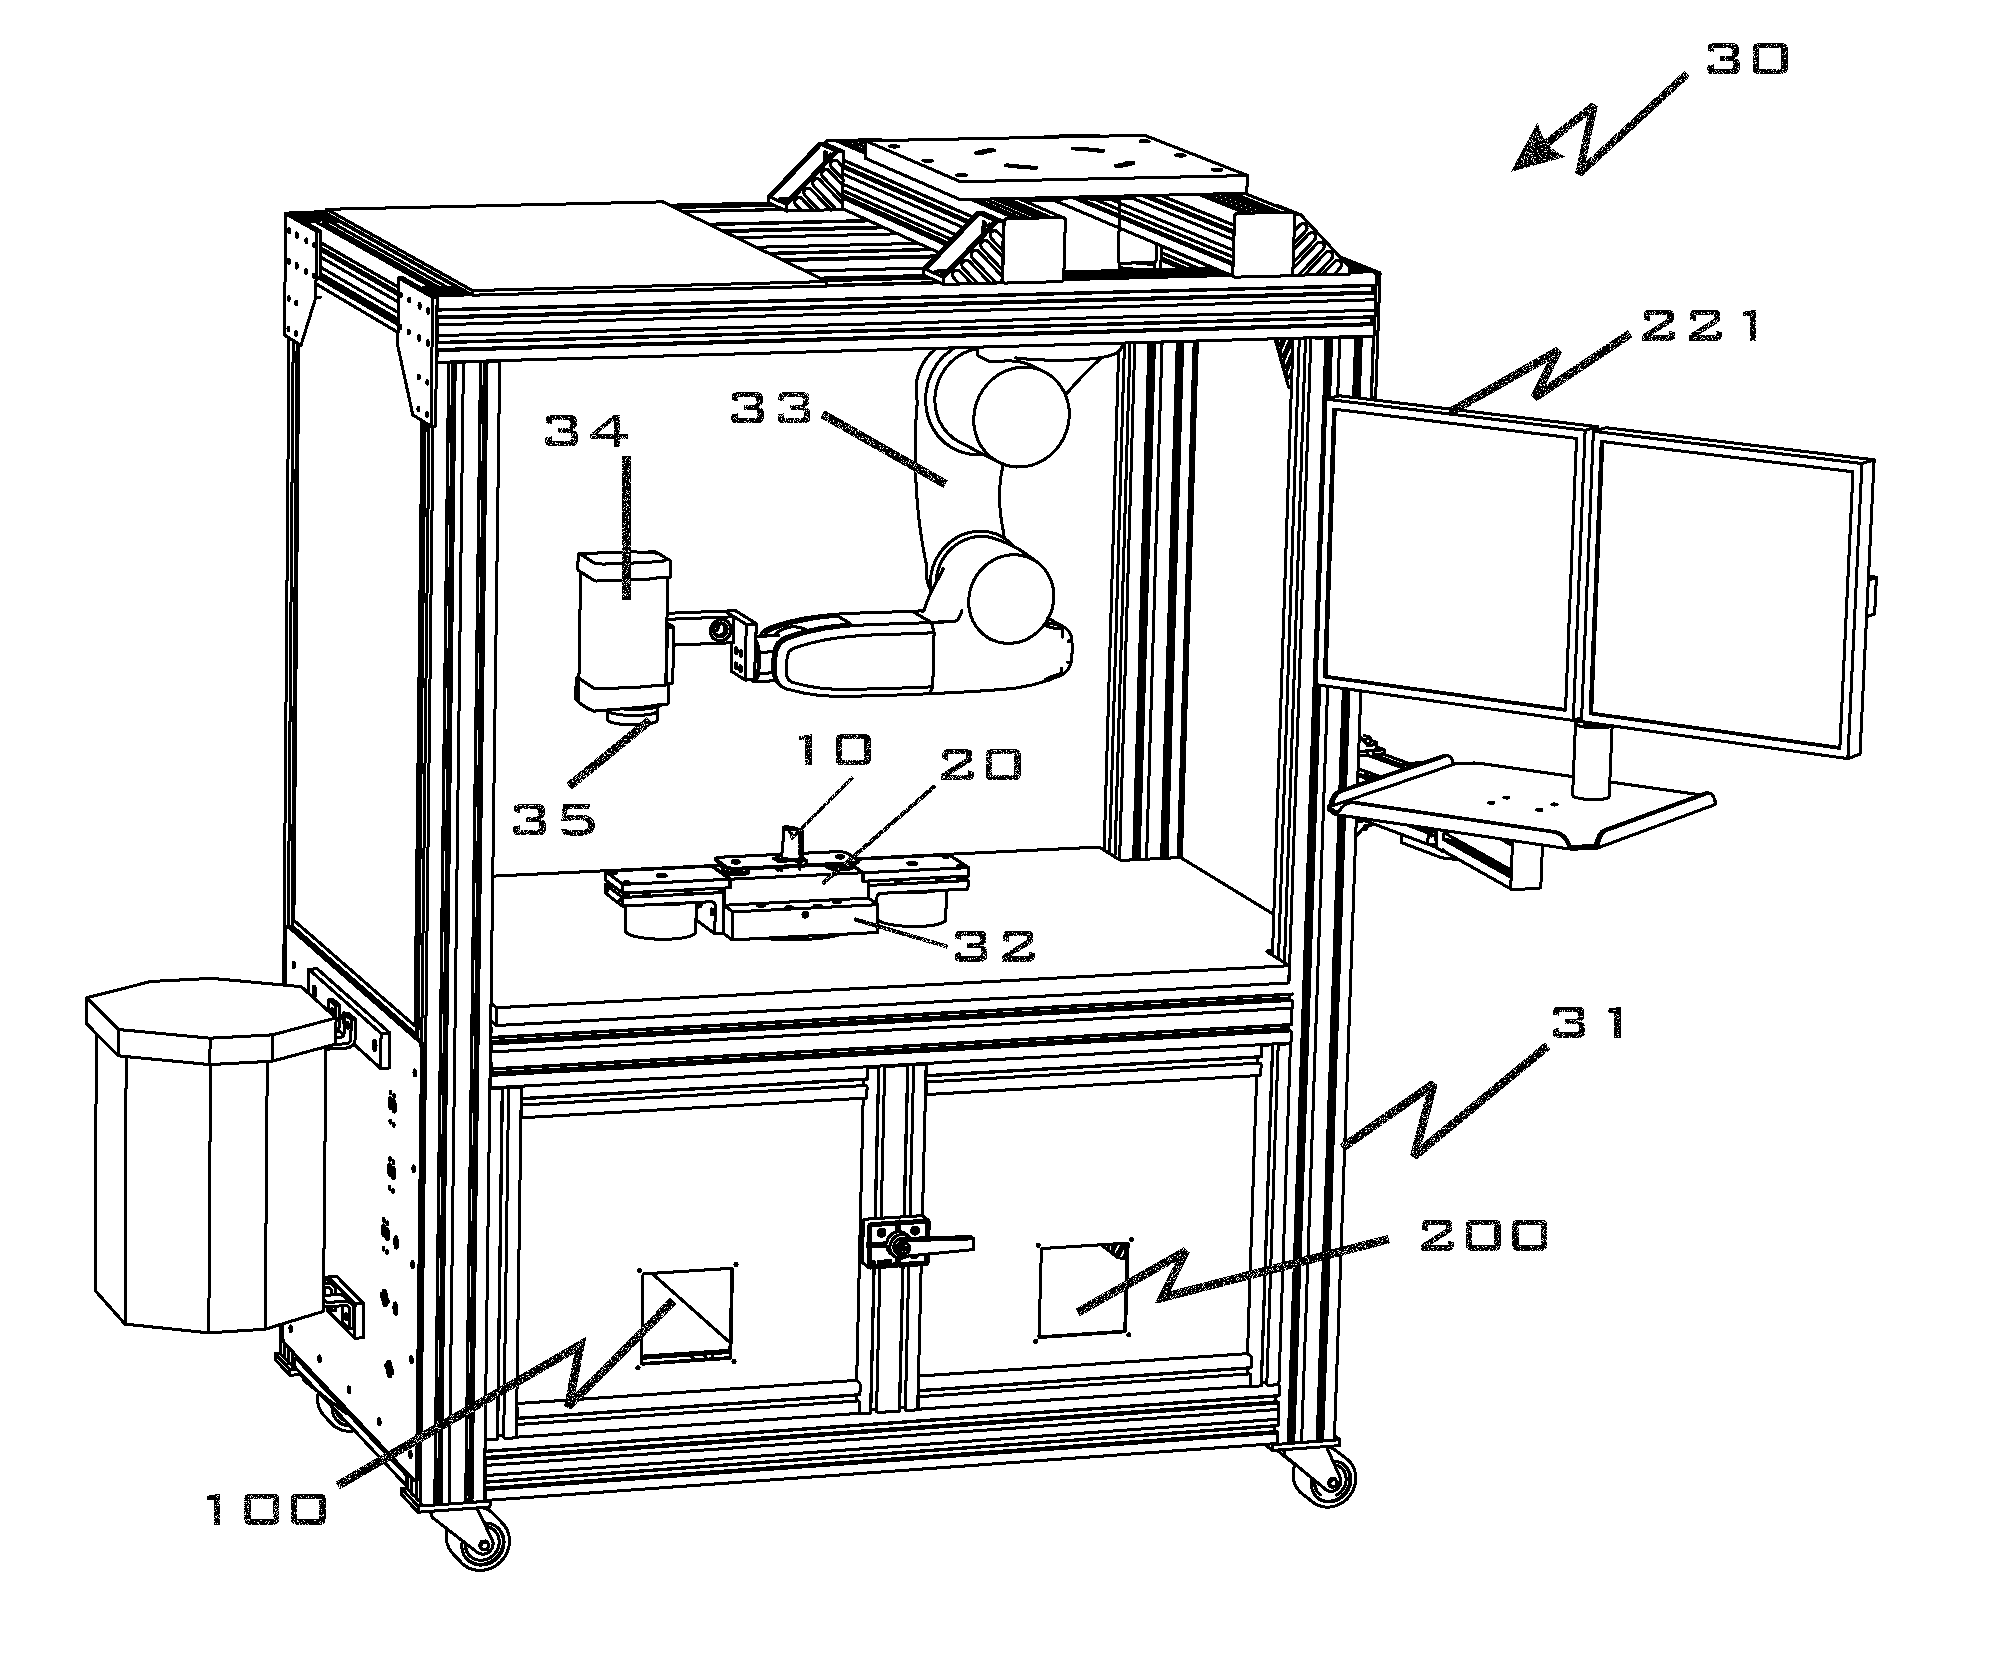 Apparatus and Method For Measurement of the Film Cooling Effect Produced By Air Cooled Gas Turbine Components